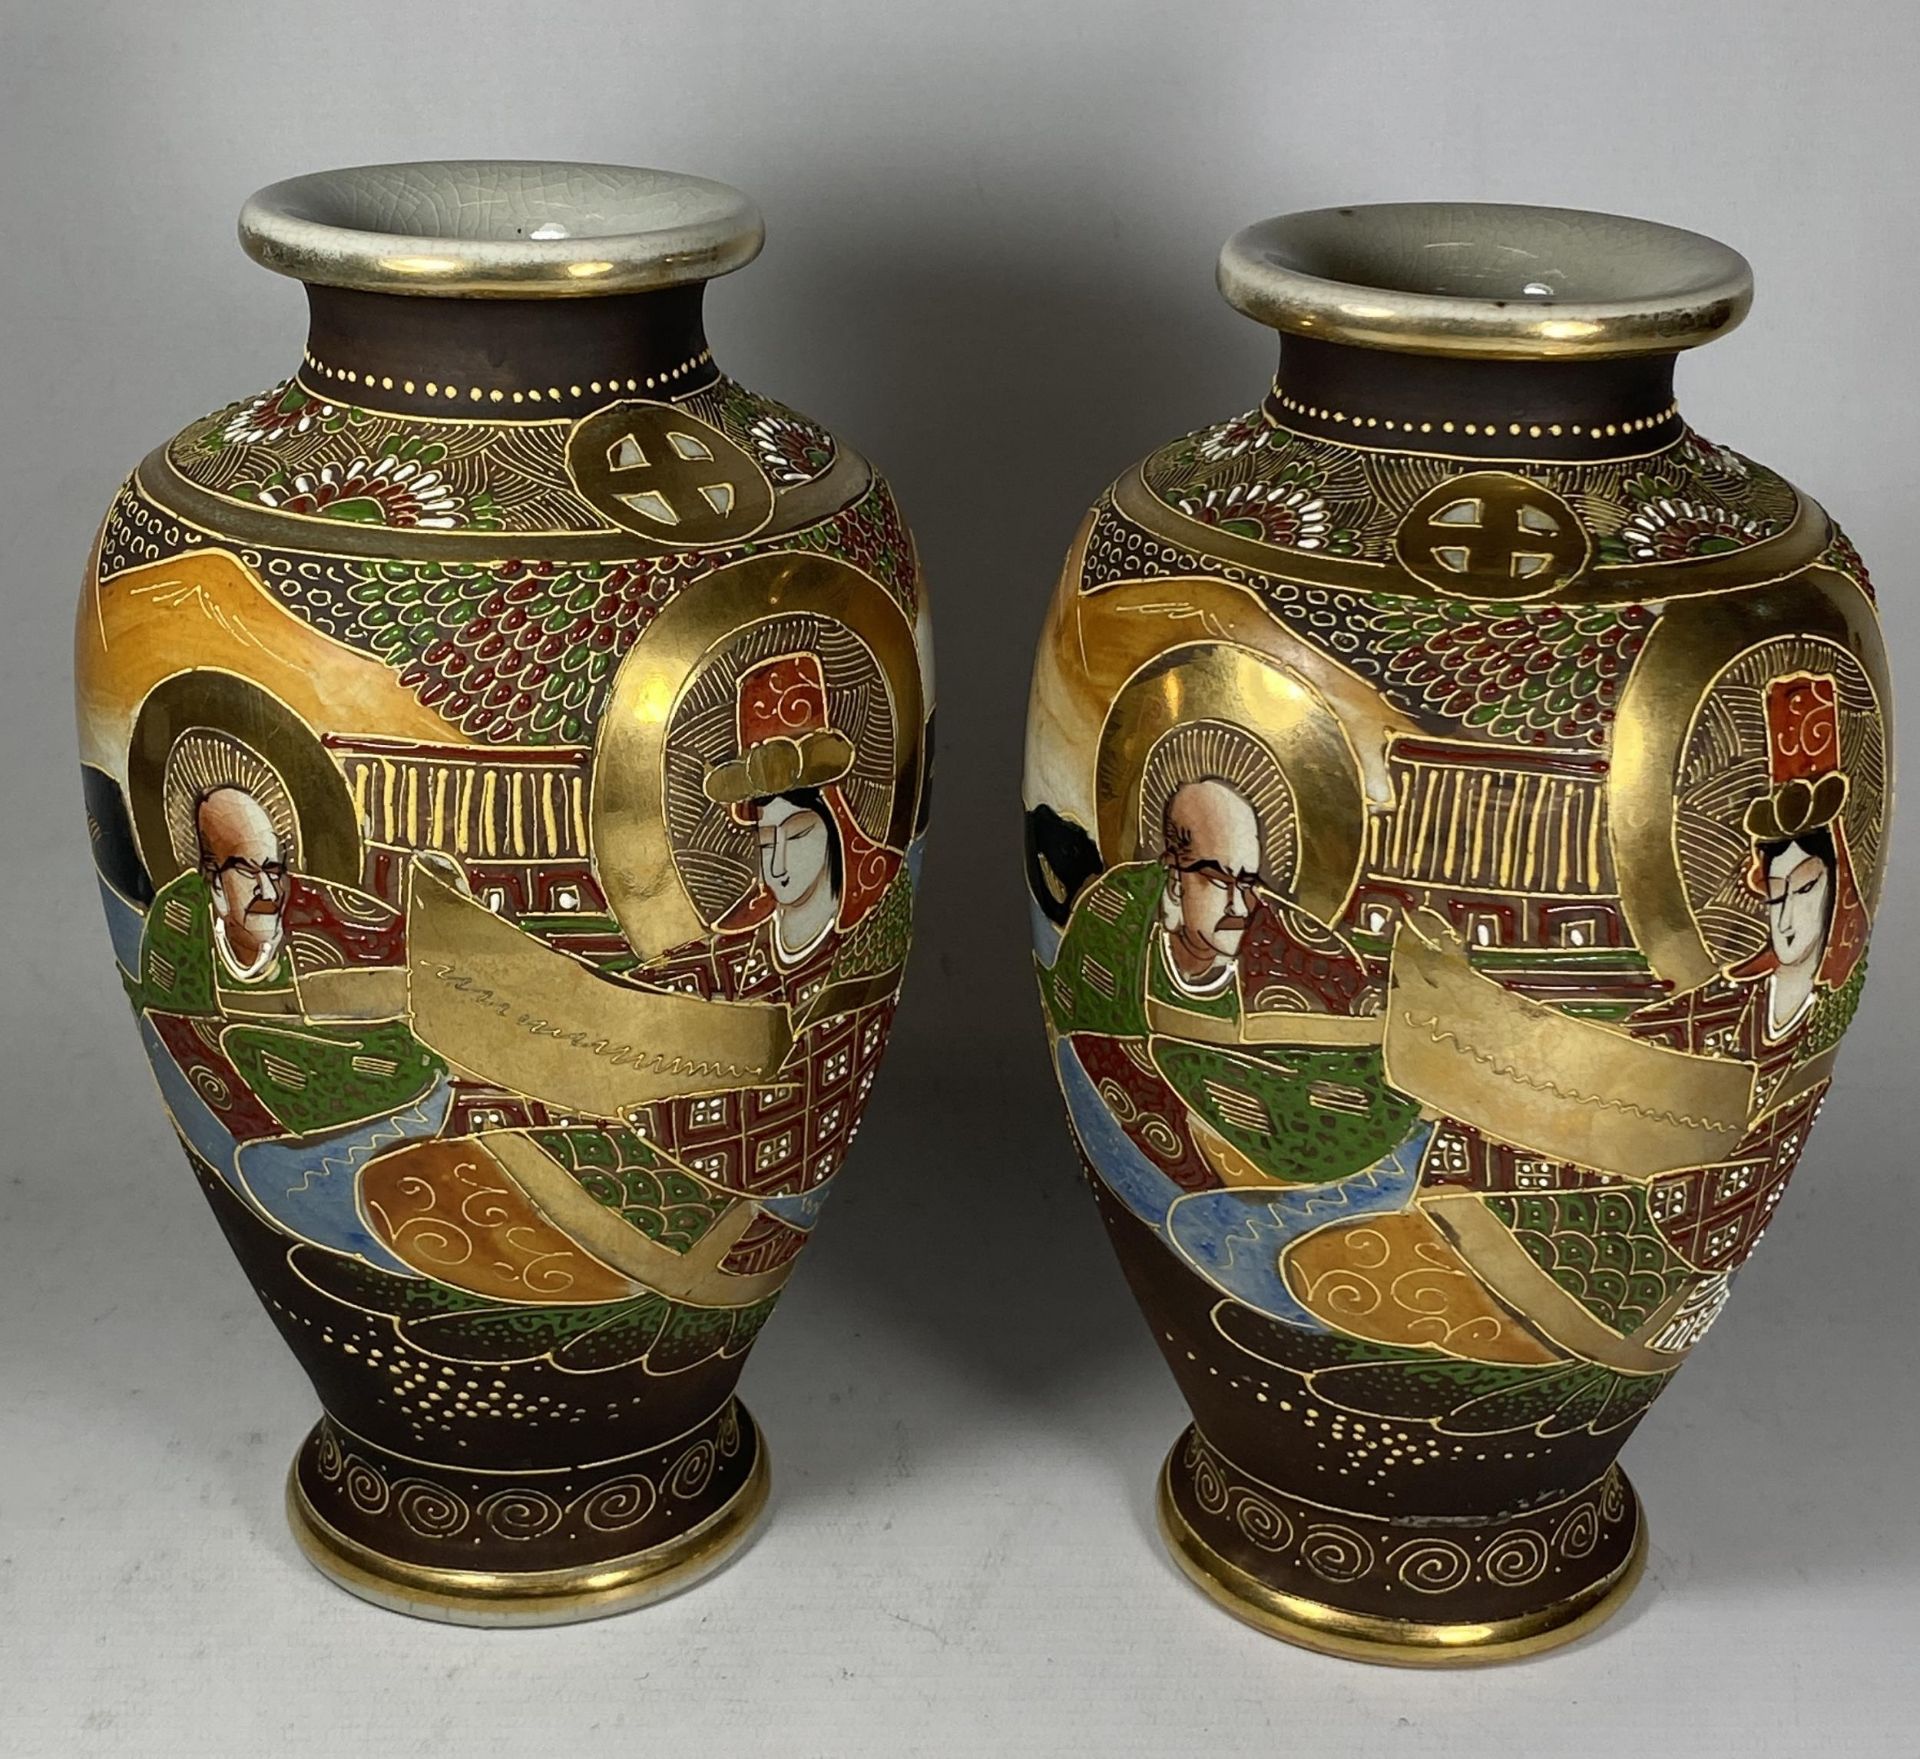 A PAIR OF JAPANESE SATSUMA OVOID FORM VASES WITH FIGURAL DESIGN, HEIGHT 24.5CM